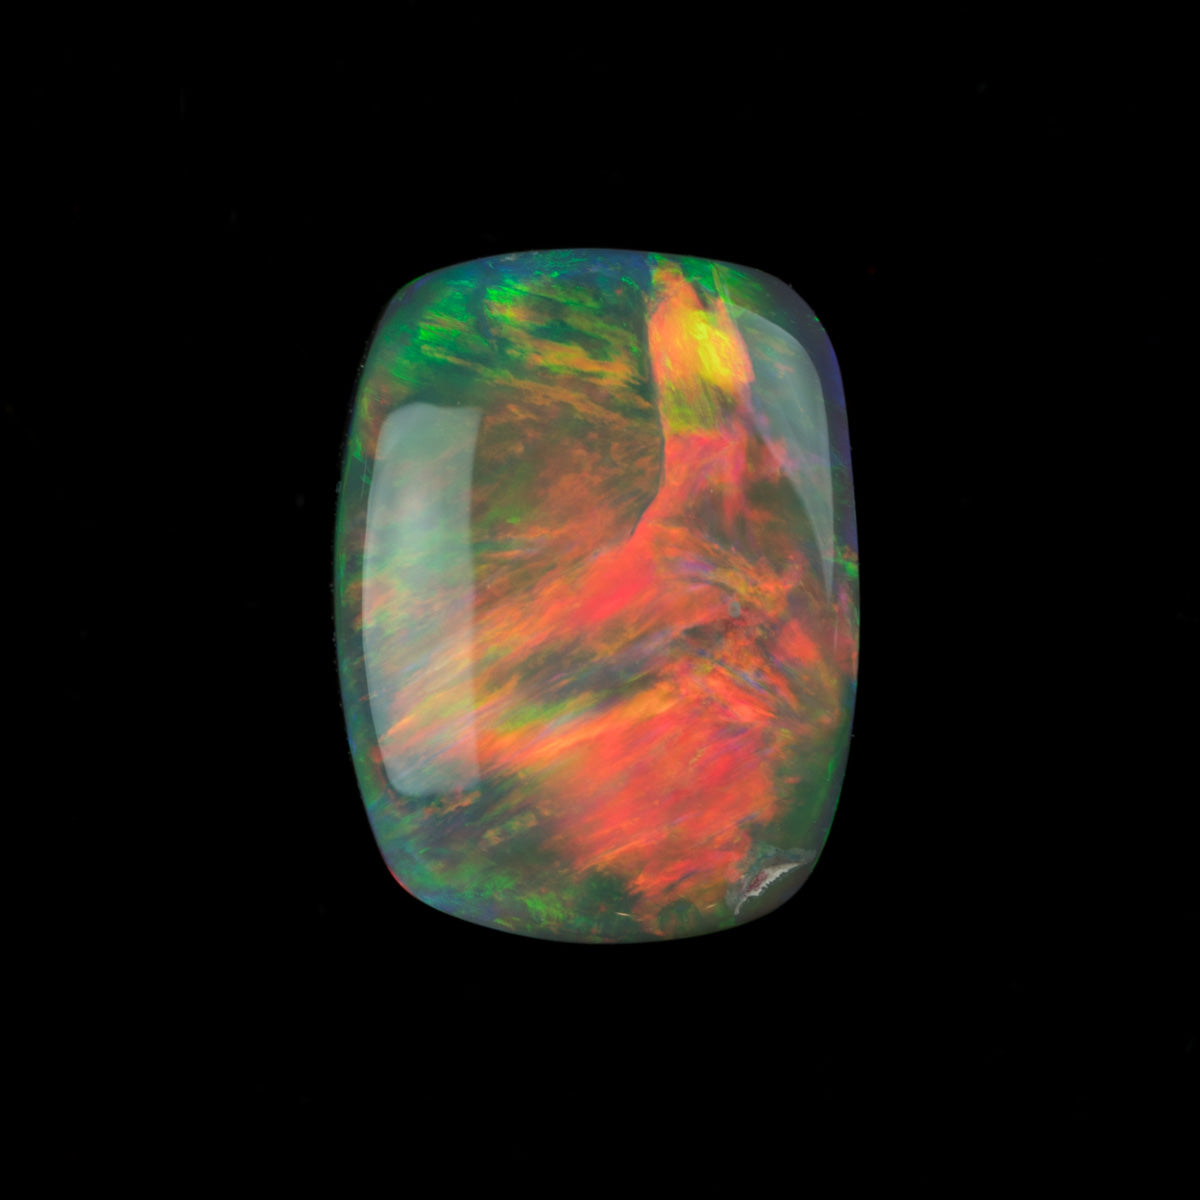 1.91ct Precious Solid Australian Opal (Bright Red and Yellow Flashes)